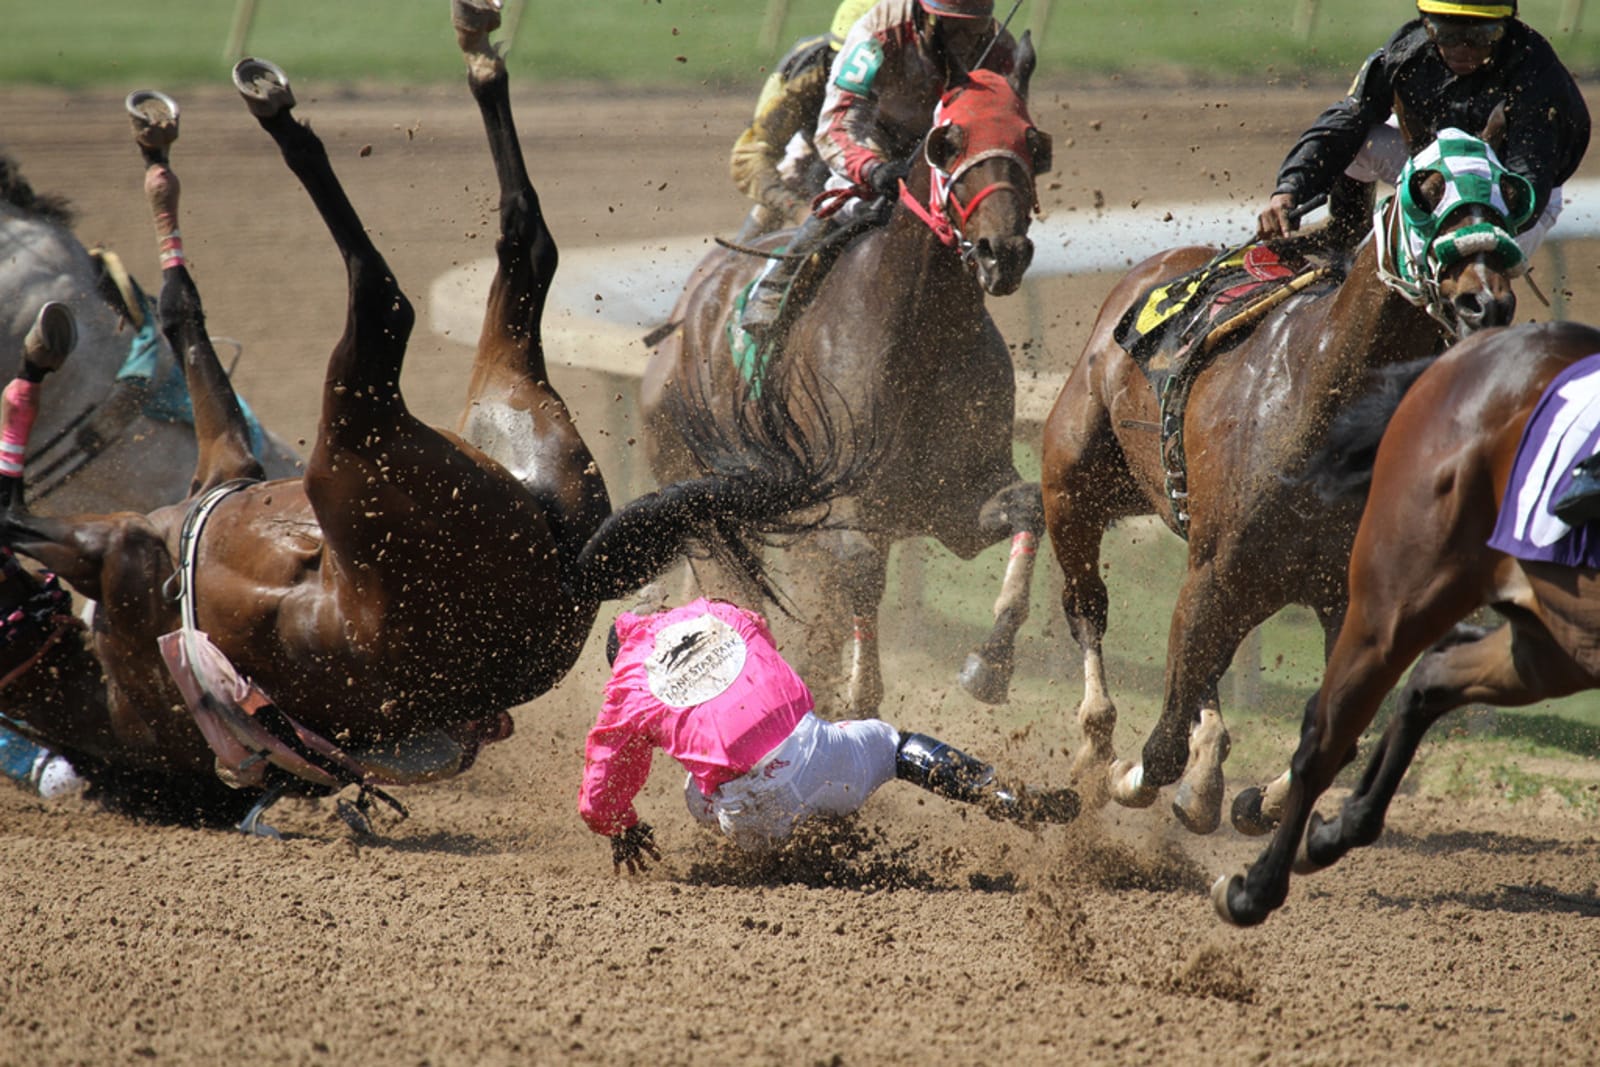 5 Myths the Horseracing Industry Spreads